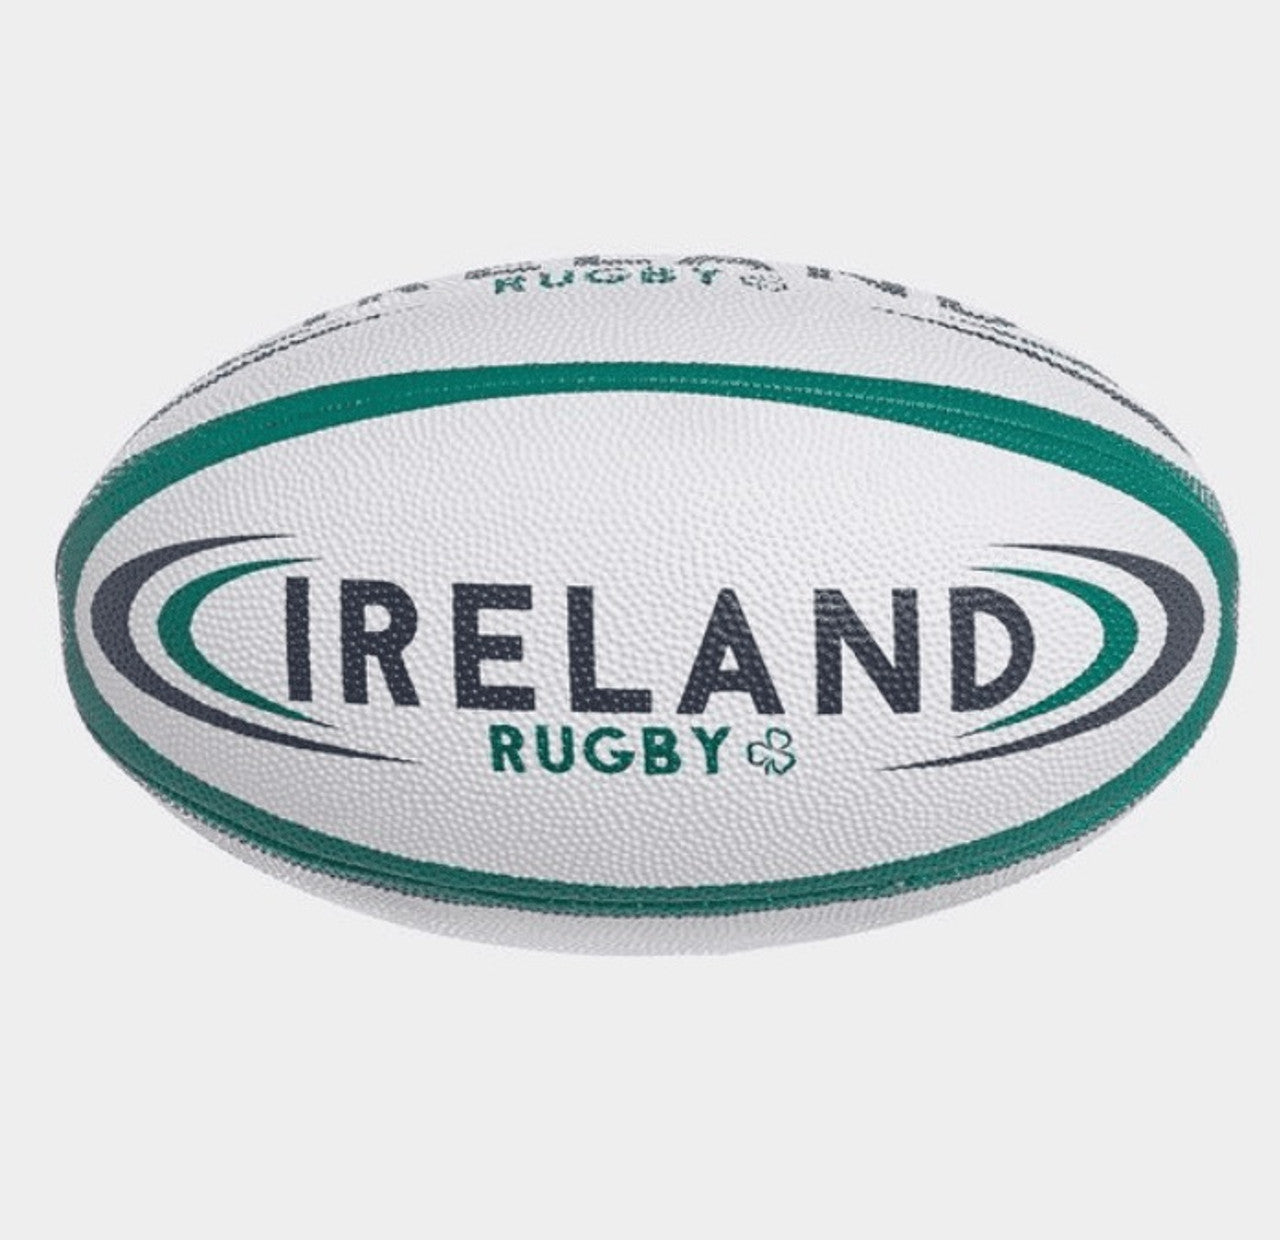 SIZE 4 RUGBY BALL WITH DIMPLED FINISH SURFACE